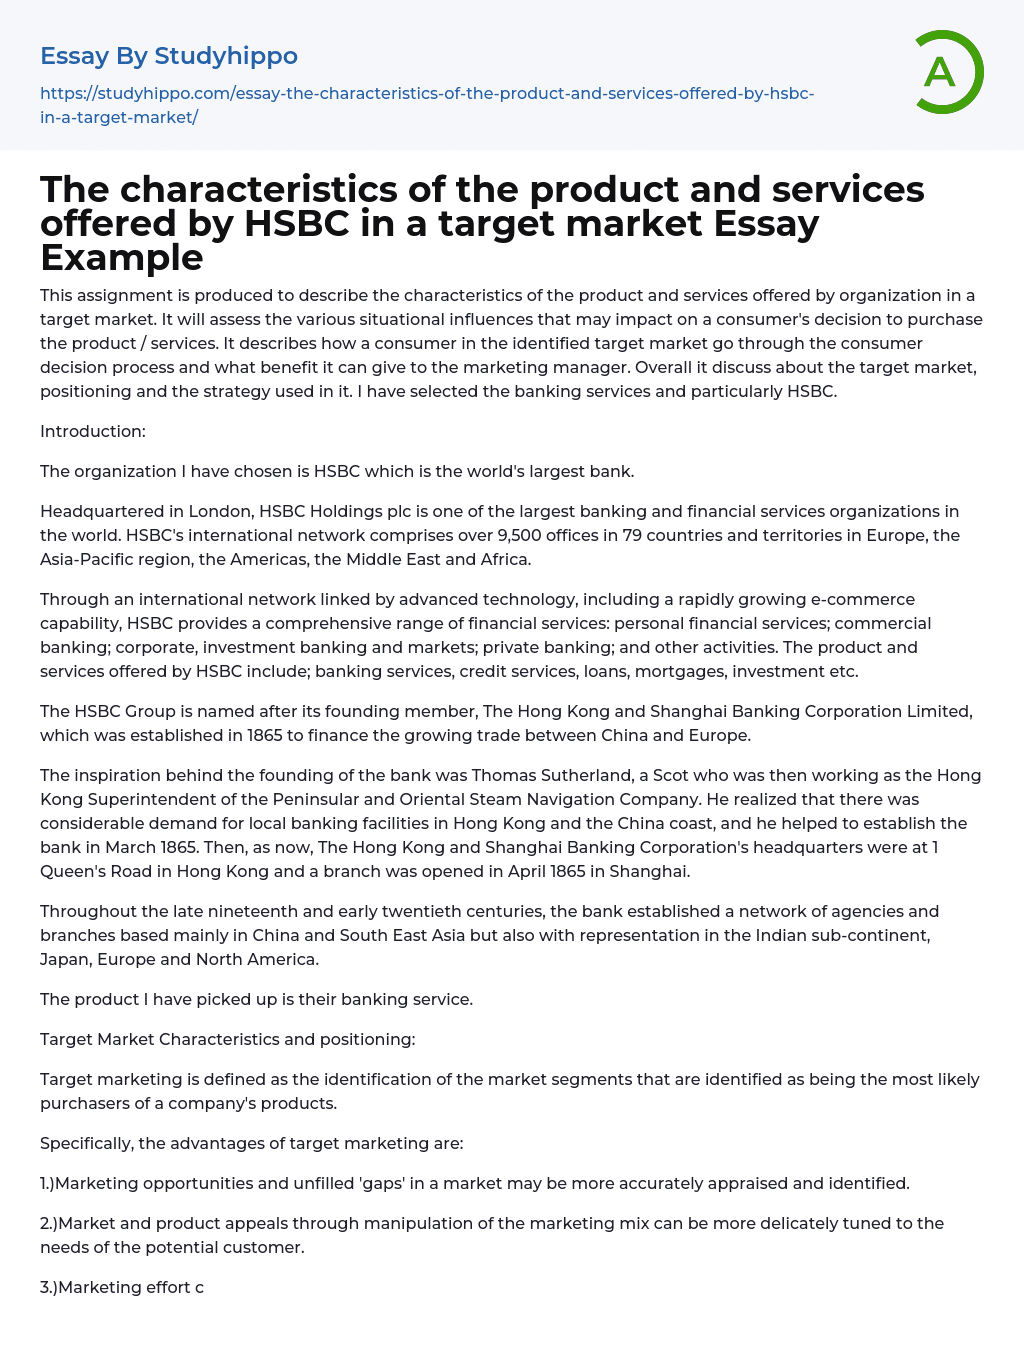 The characteristics of the product and services offered by HSBC in a target market Essay Example